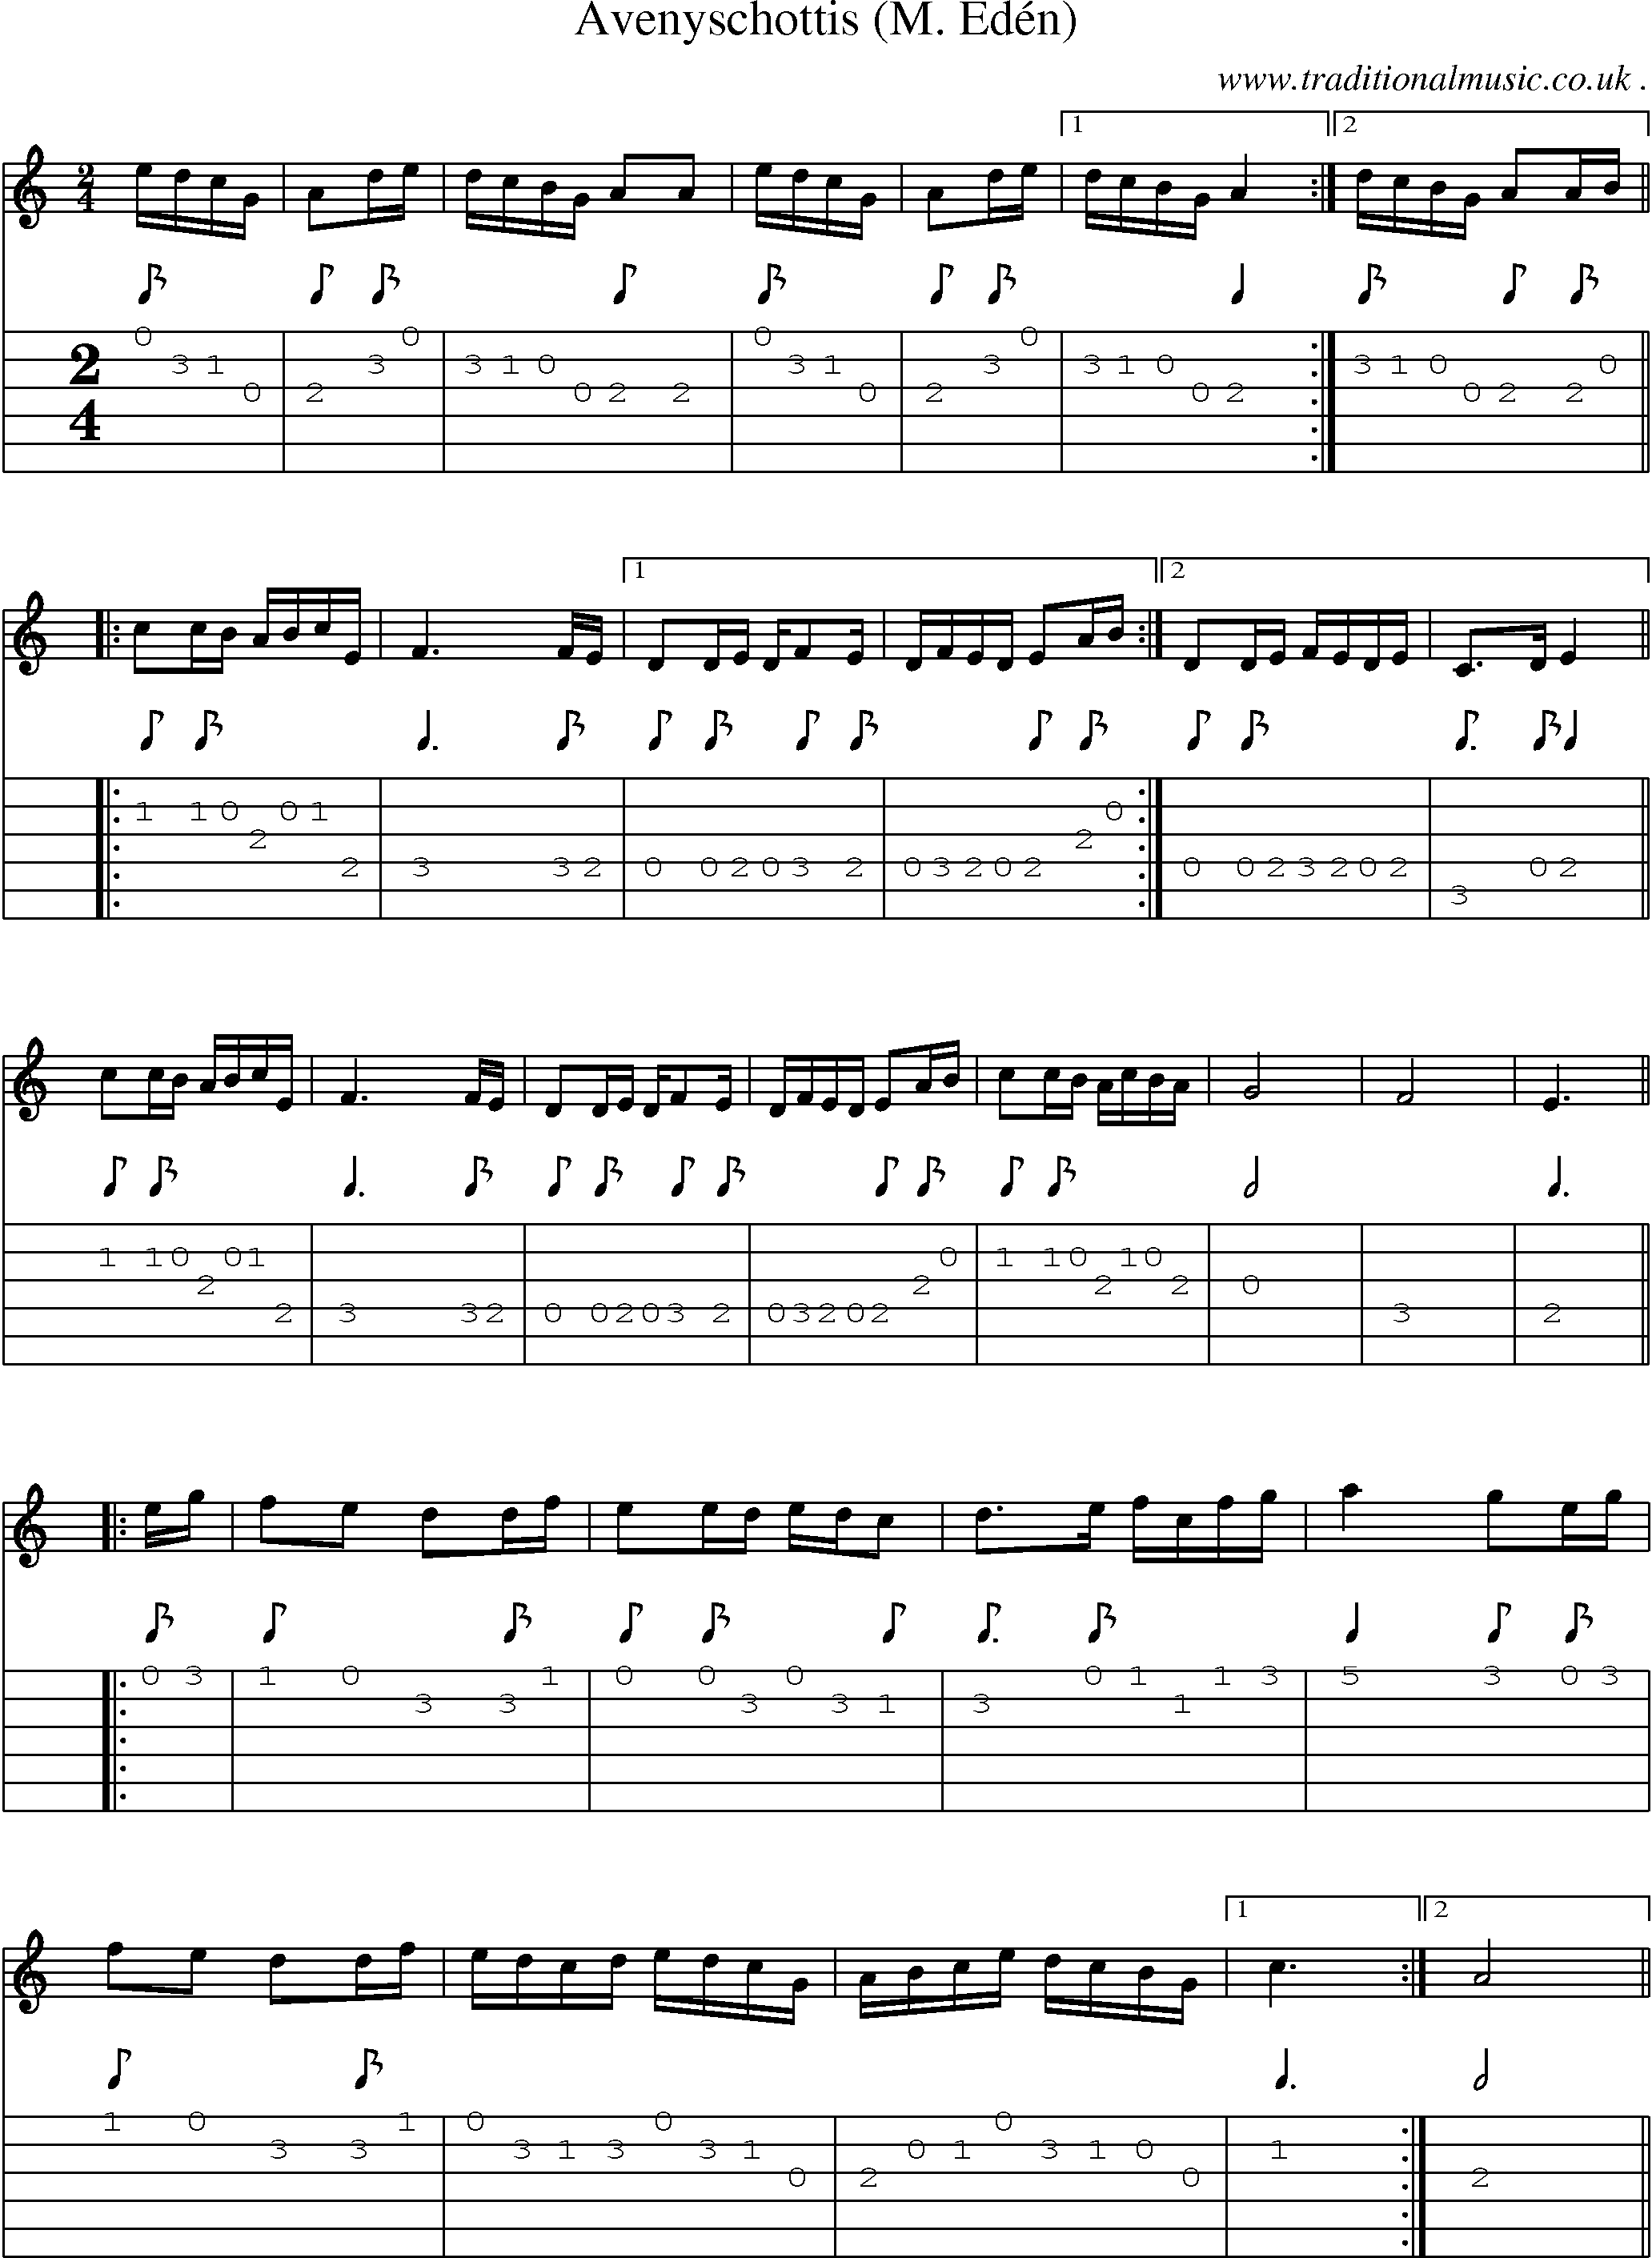 Sheet-Music and Guitar Tabs for Avenyschottis